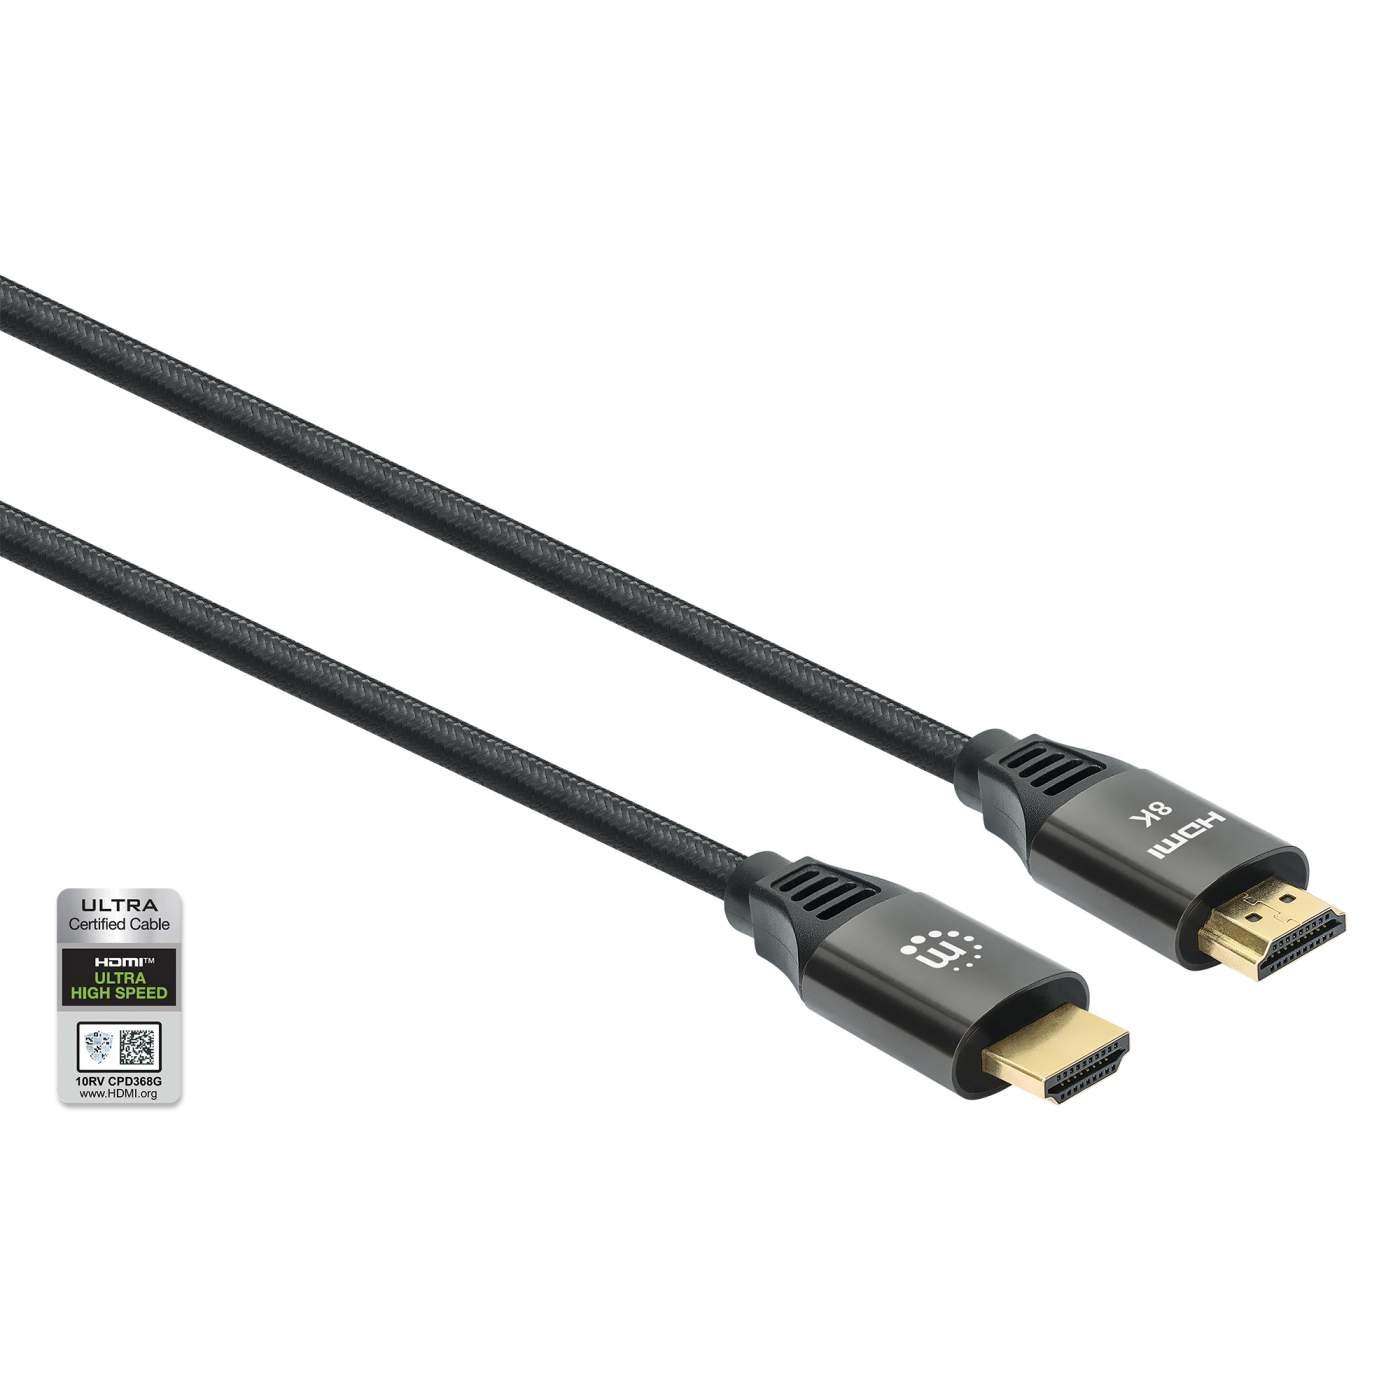 HDMI2-US - New Ultra Slim, High Speed with Ethernet HDMI Cable (HDMI 2.0 &  4K Certified) 0.5M/1M/1.8M - CYP